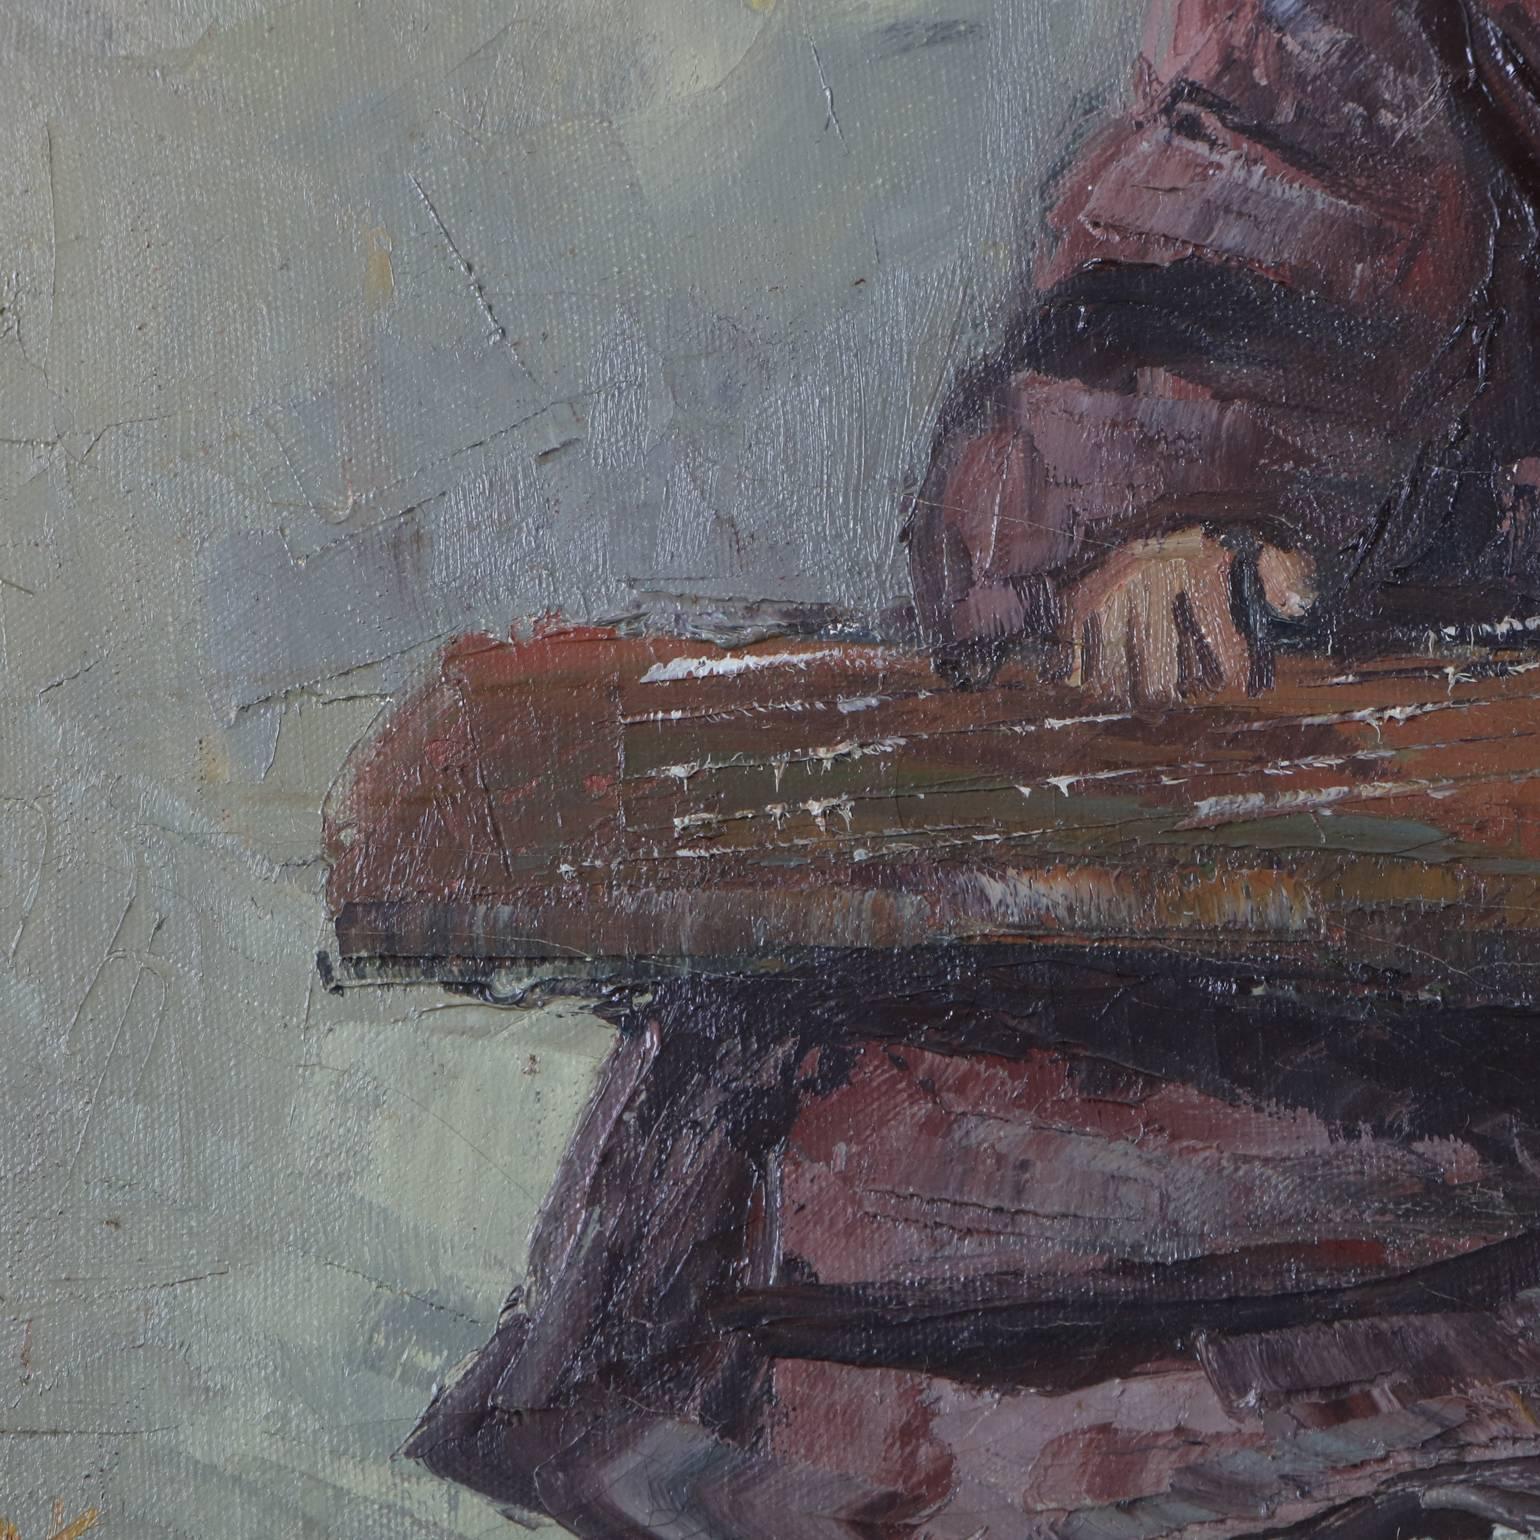 Hand-Painted Chinese Oil on Canvas Signed Painting of Musician Playing a Guqin, 20th Century